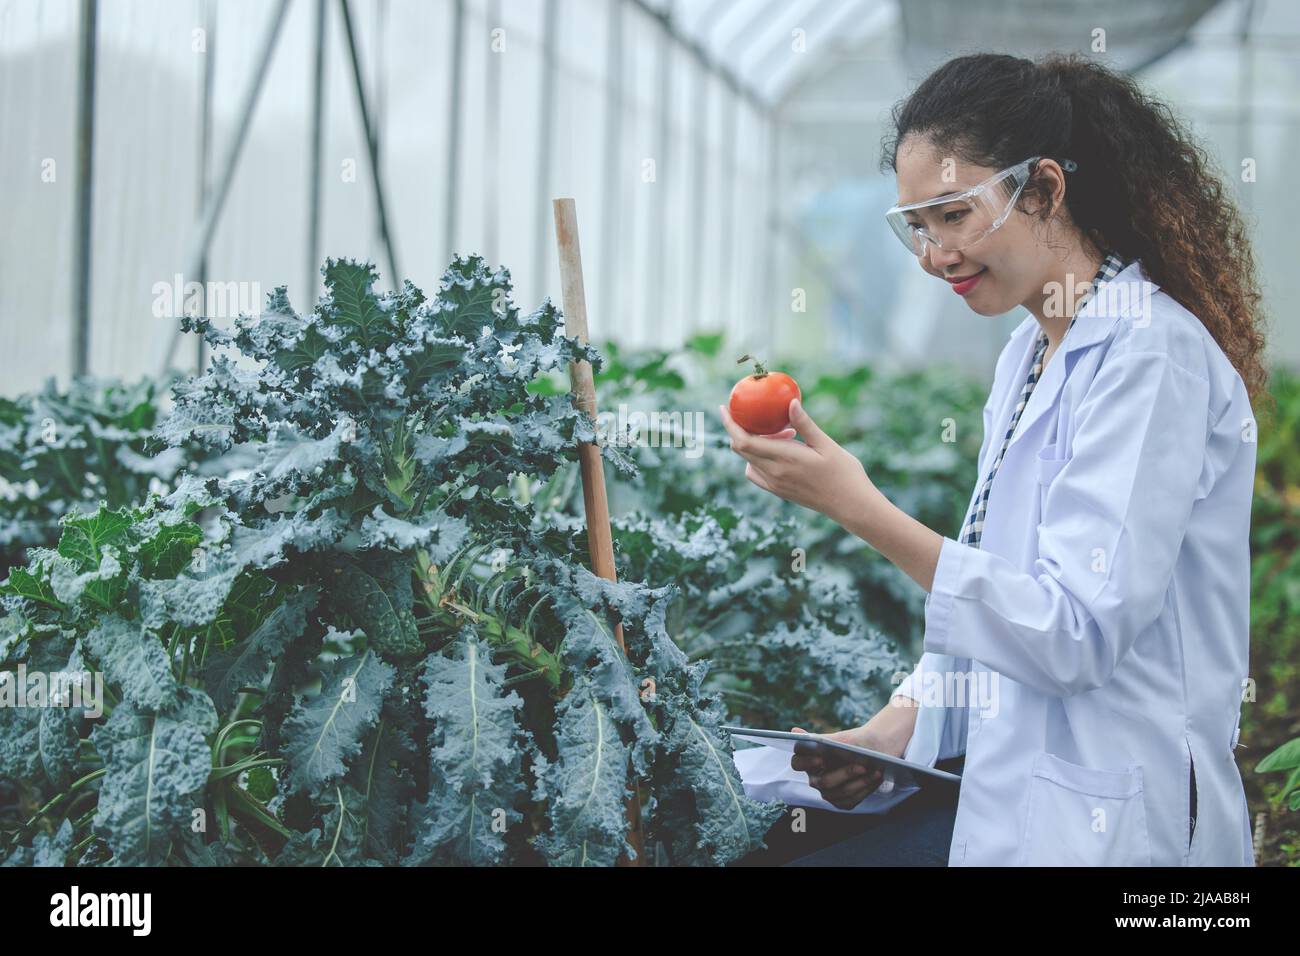 Agriculture plant science technology research and development concept. Stock Photo